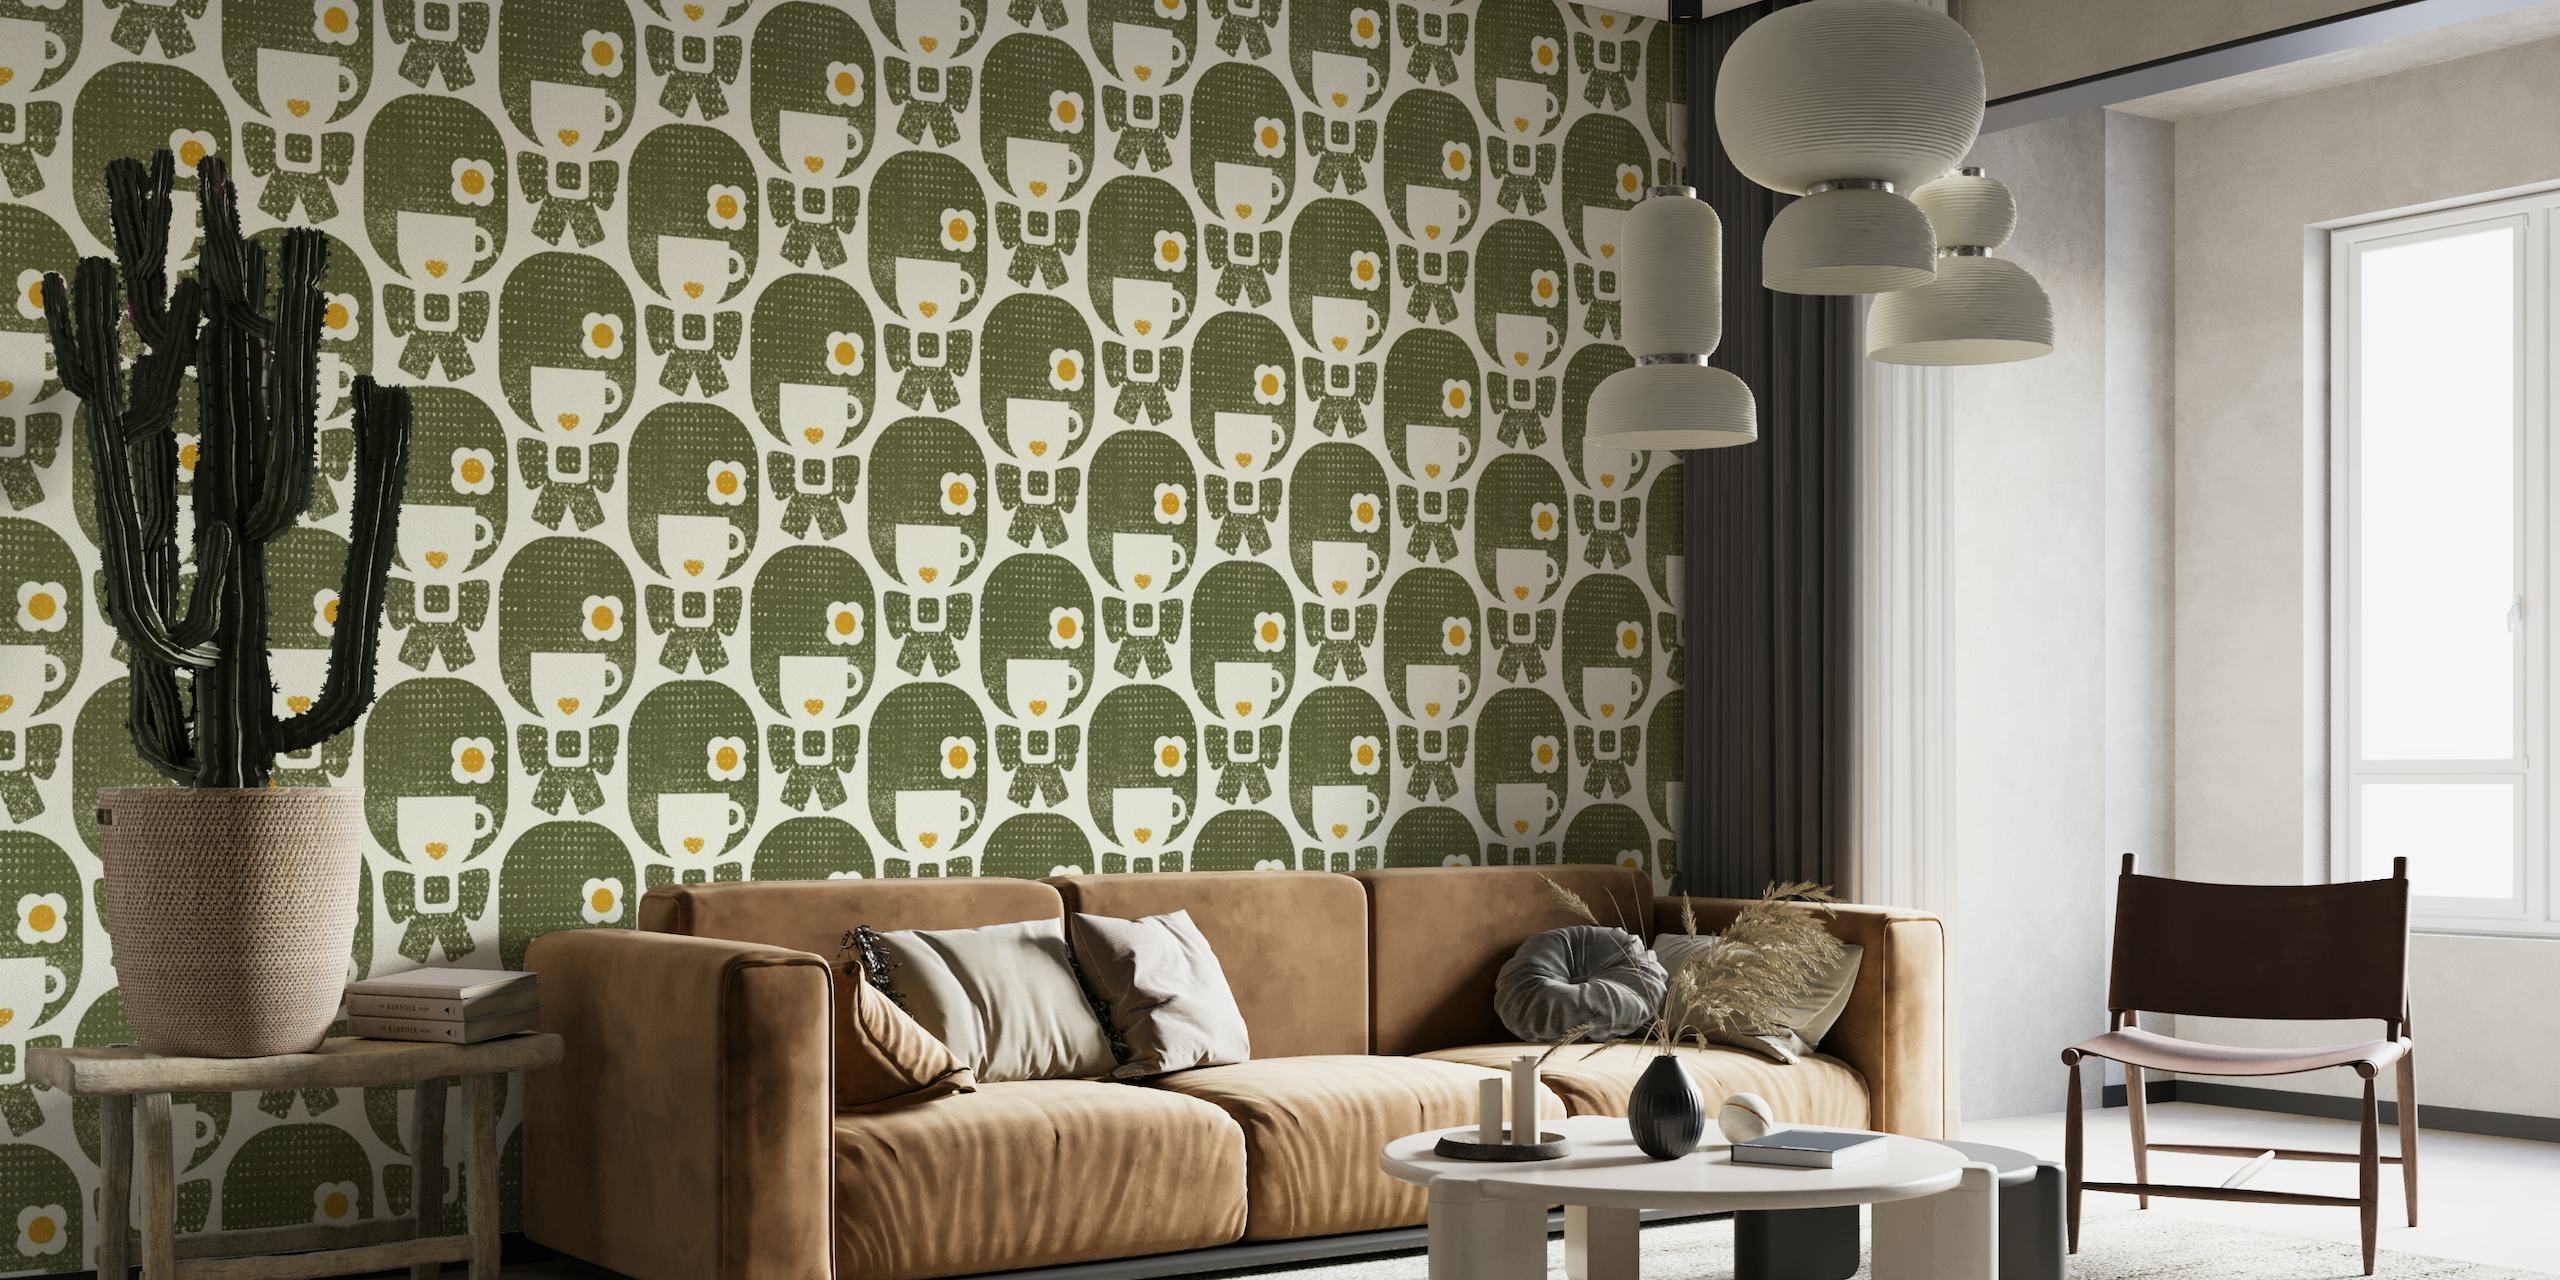 Khaki retro female figures with coffee cups and daisy accents wall mural